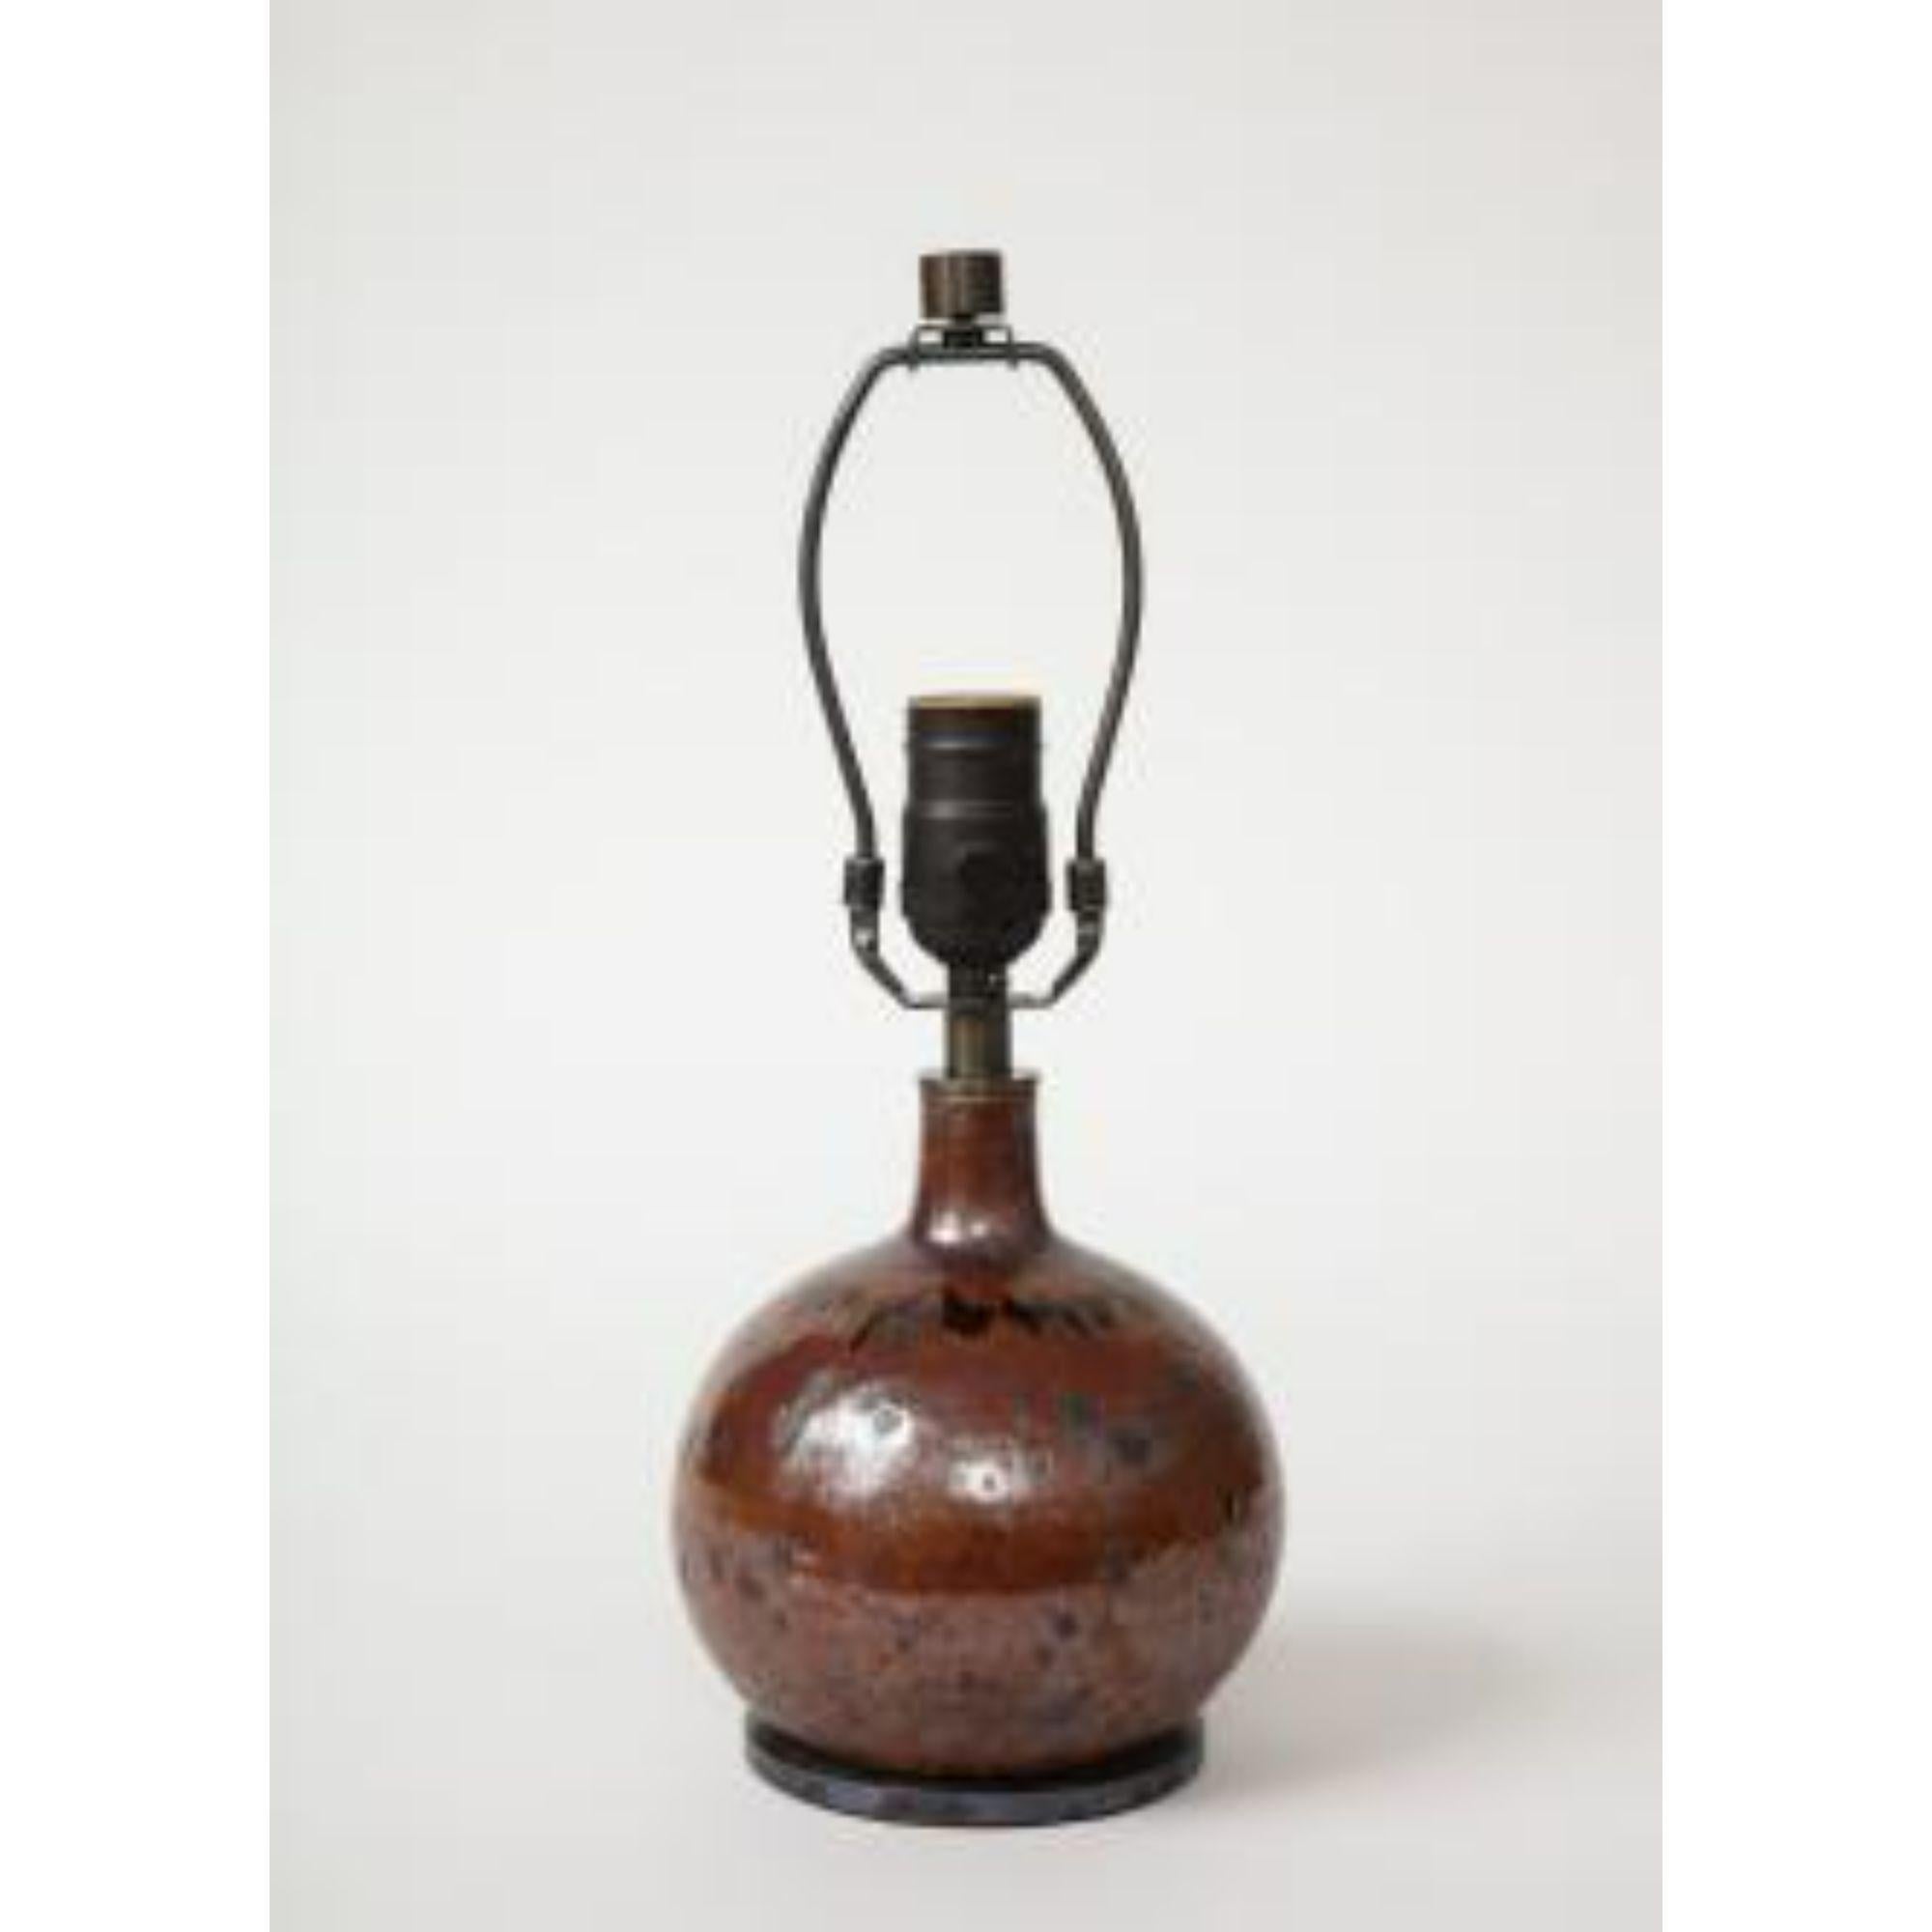 Small Round Mid-Century Brown Ceramic Lamp, France, c. 1960s

This lamp has been rewired and outfitted with a custom base as well as a black twisted silk cord.

